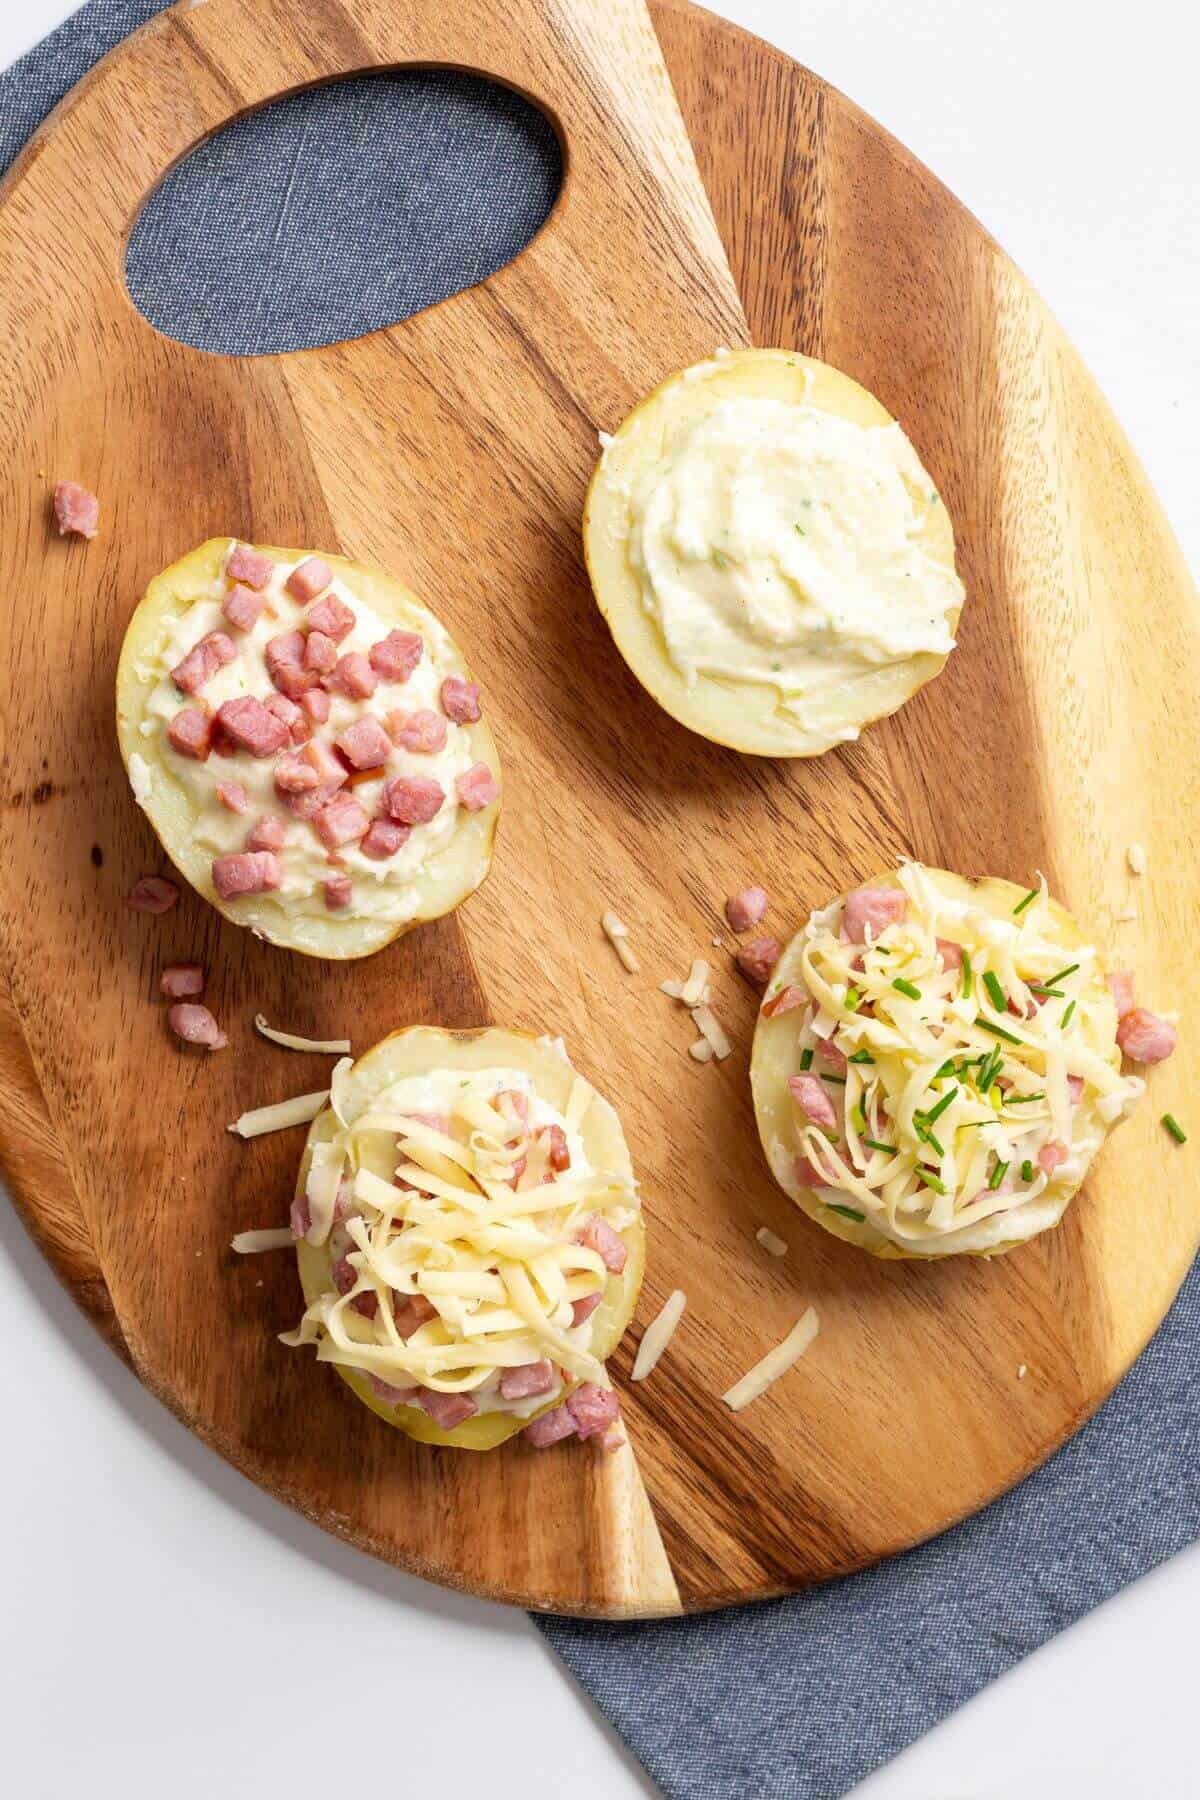 Potatoes with filling and toppings.